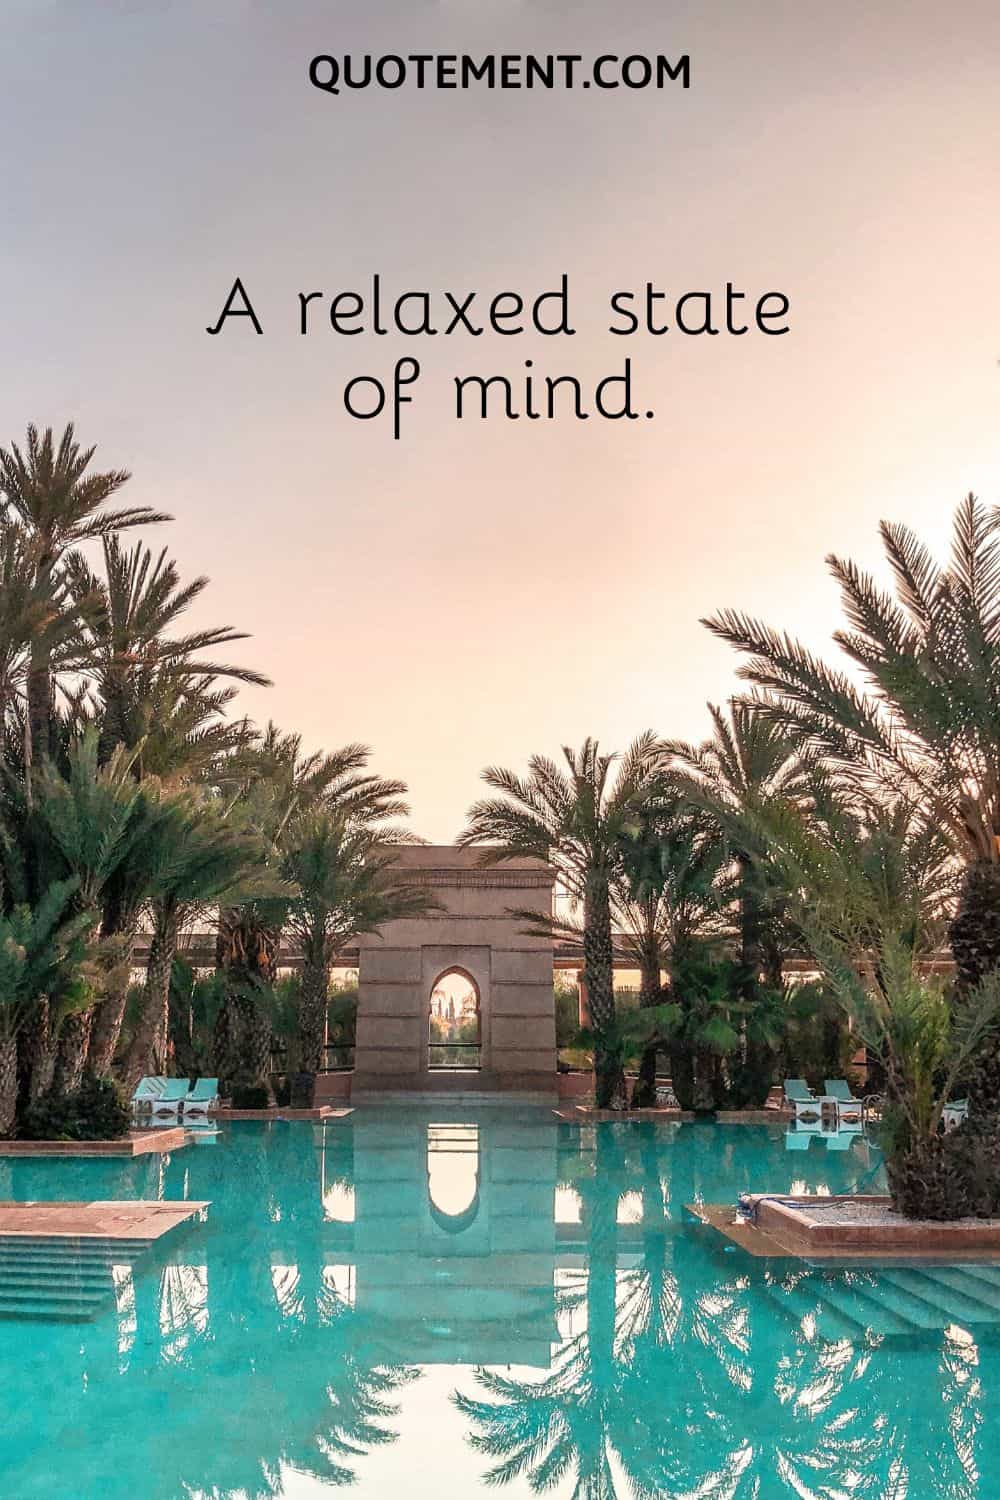 A relaxed state of mind.